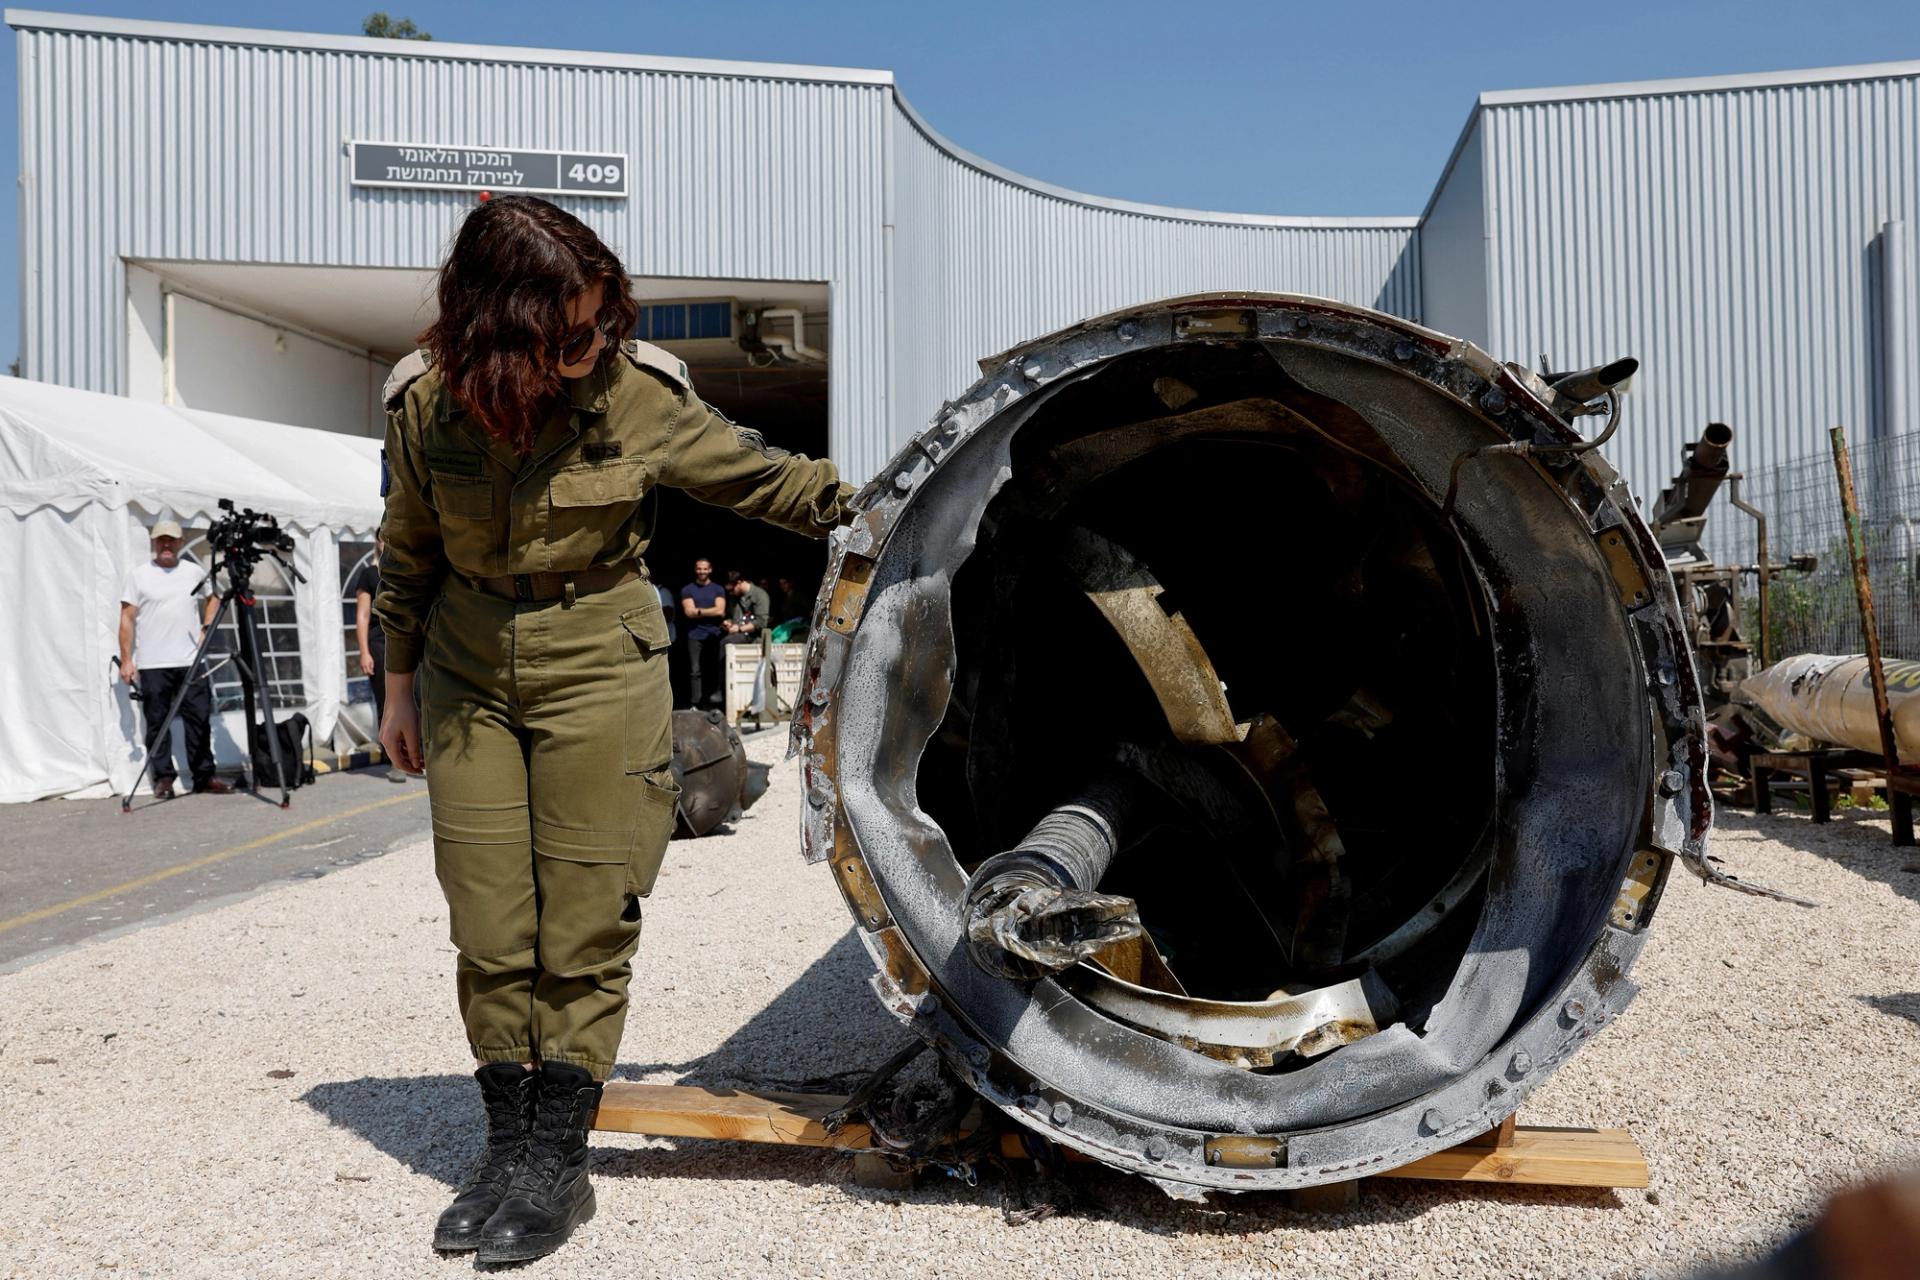 Israel's military displays what they say is an Iranian ballistic missile which they retrieved from the Dead Sea after Iran launched drones and missiles towards Israel